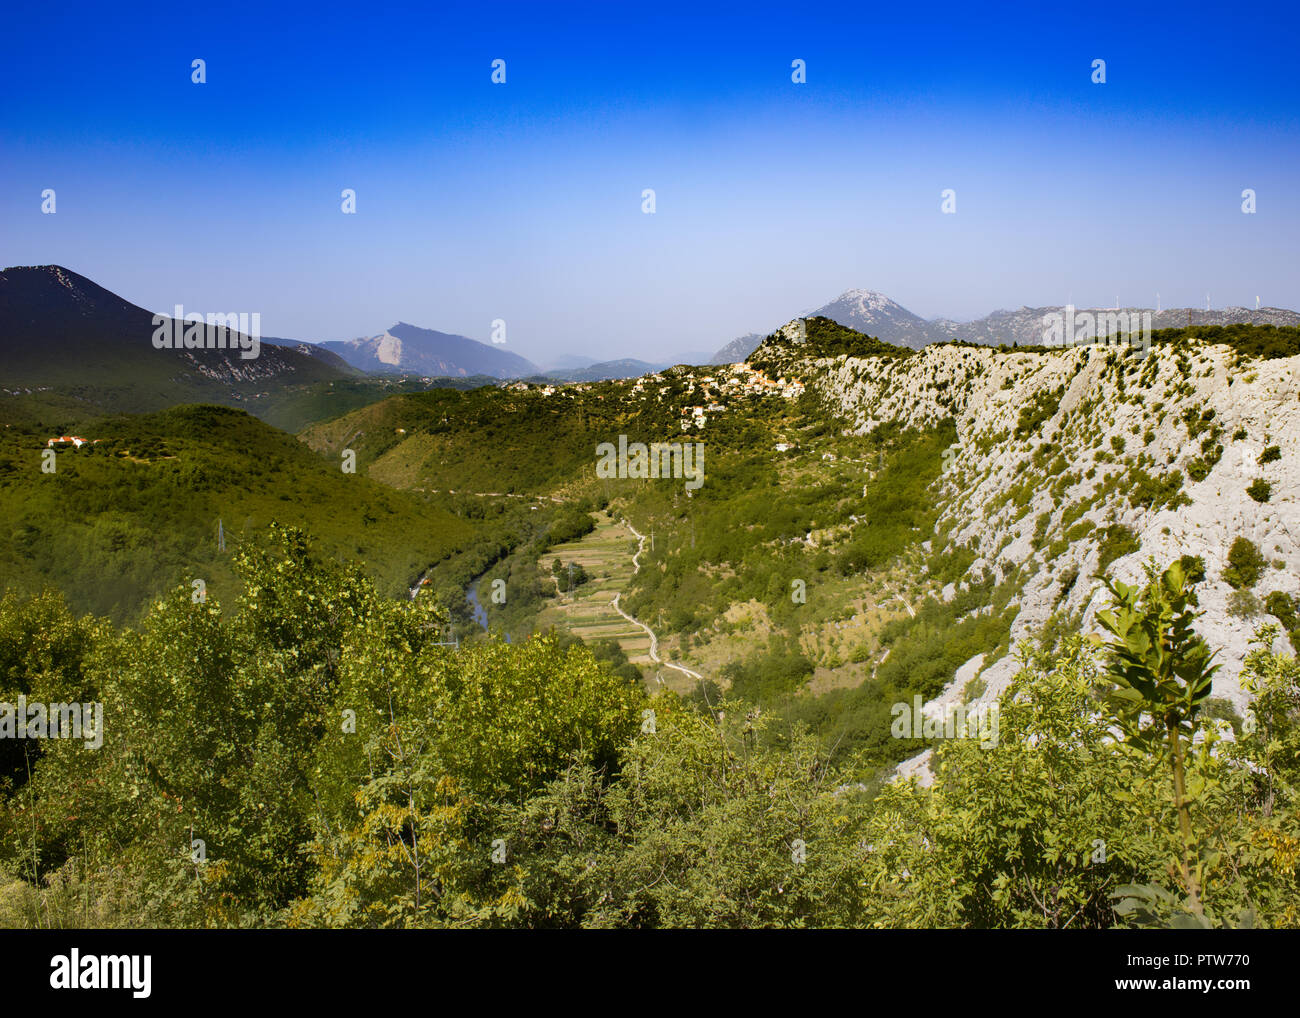 View of the mountain pass in Biokovo in Croatia. In the foreground are shrubs. The mountain range is in the background. Stock Photo